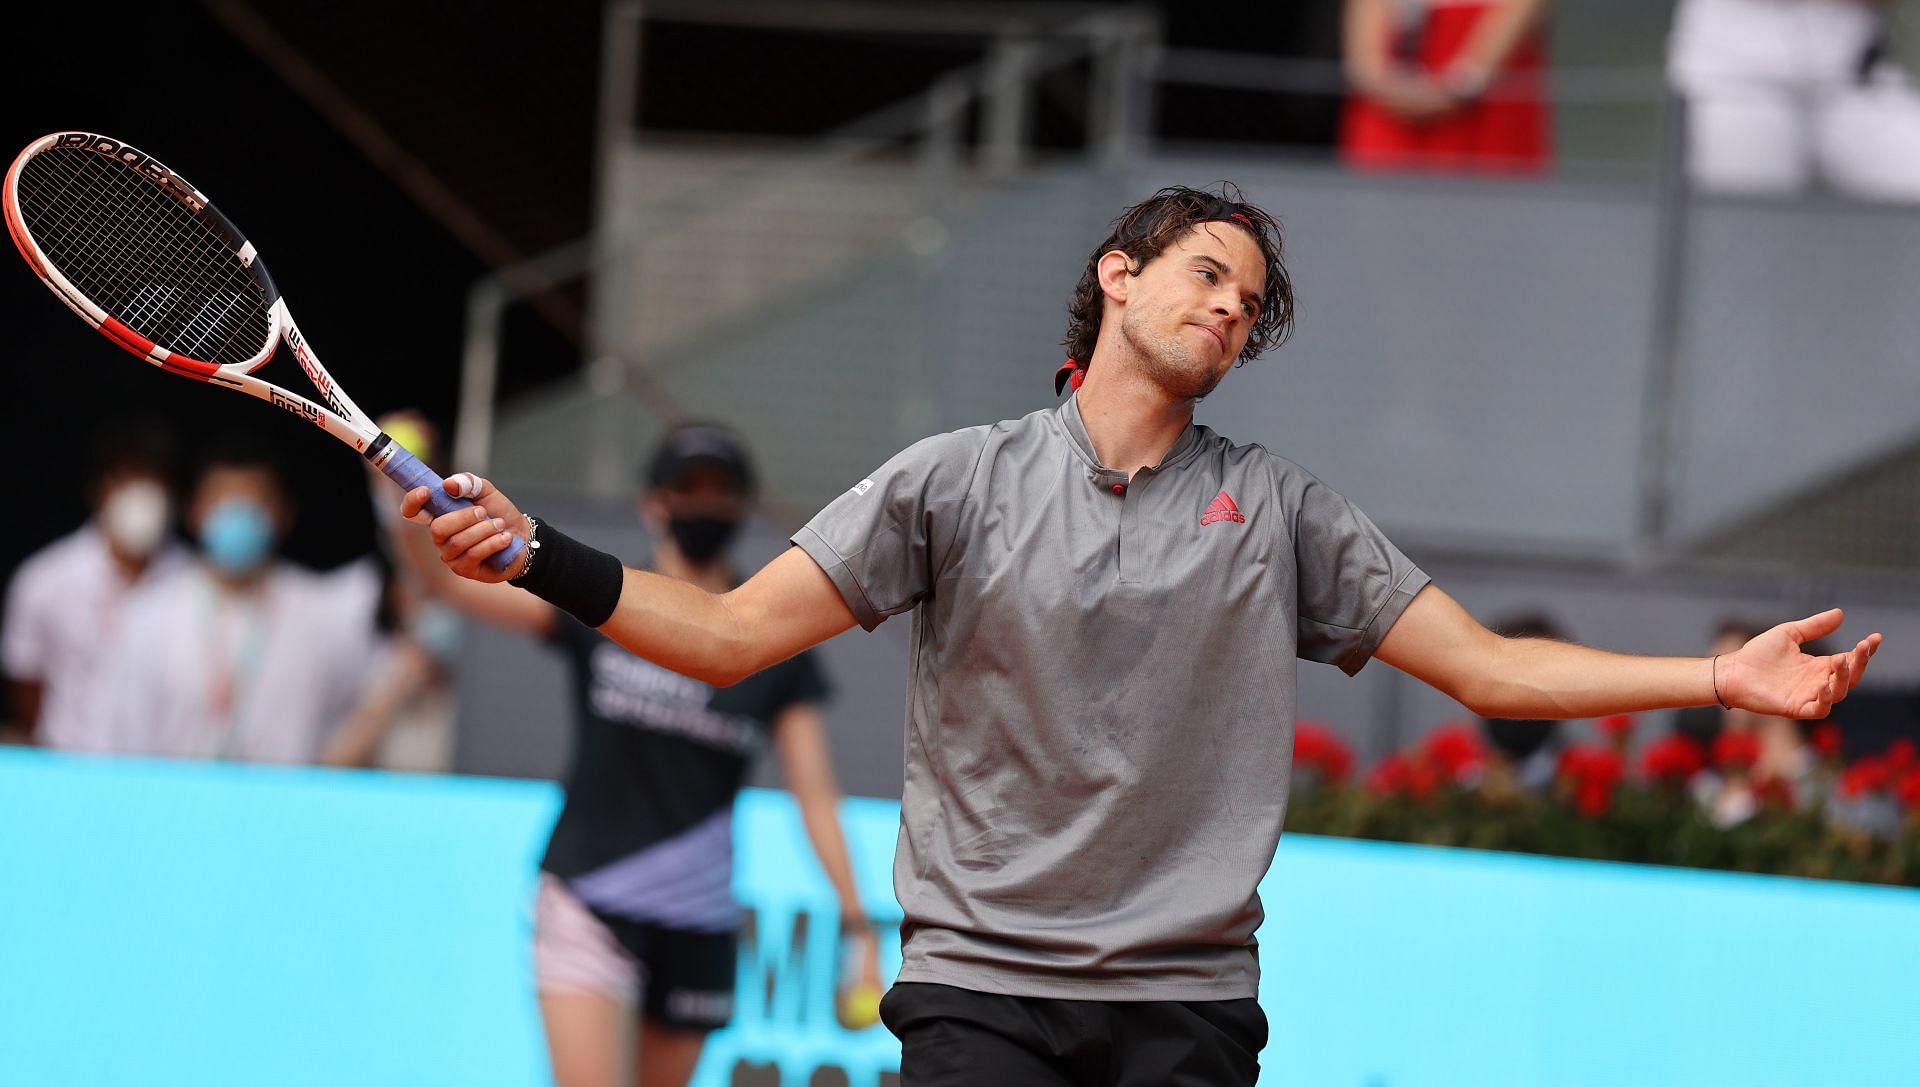 Dominic Thiem at the Mutua Madrid Open in May 2021